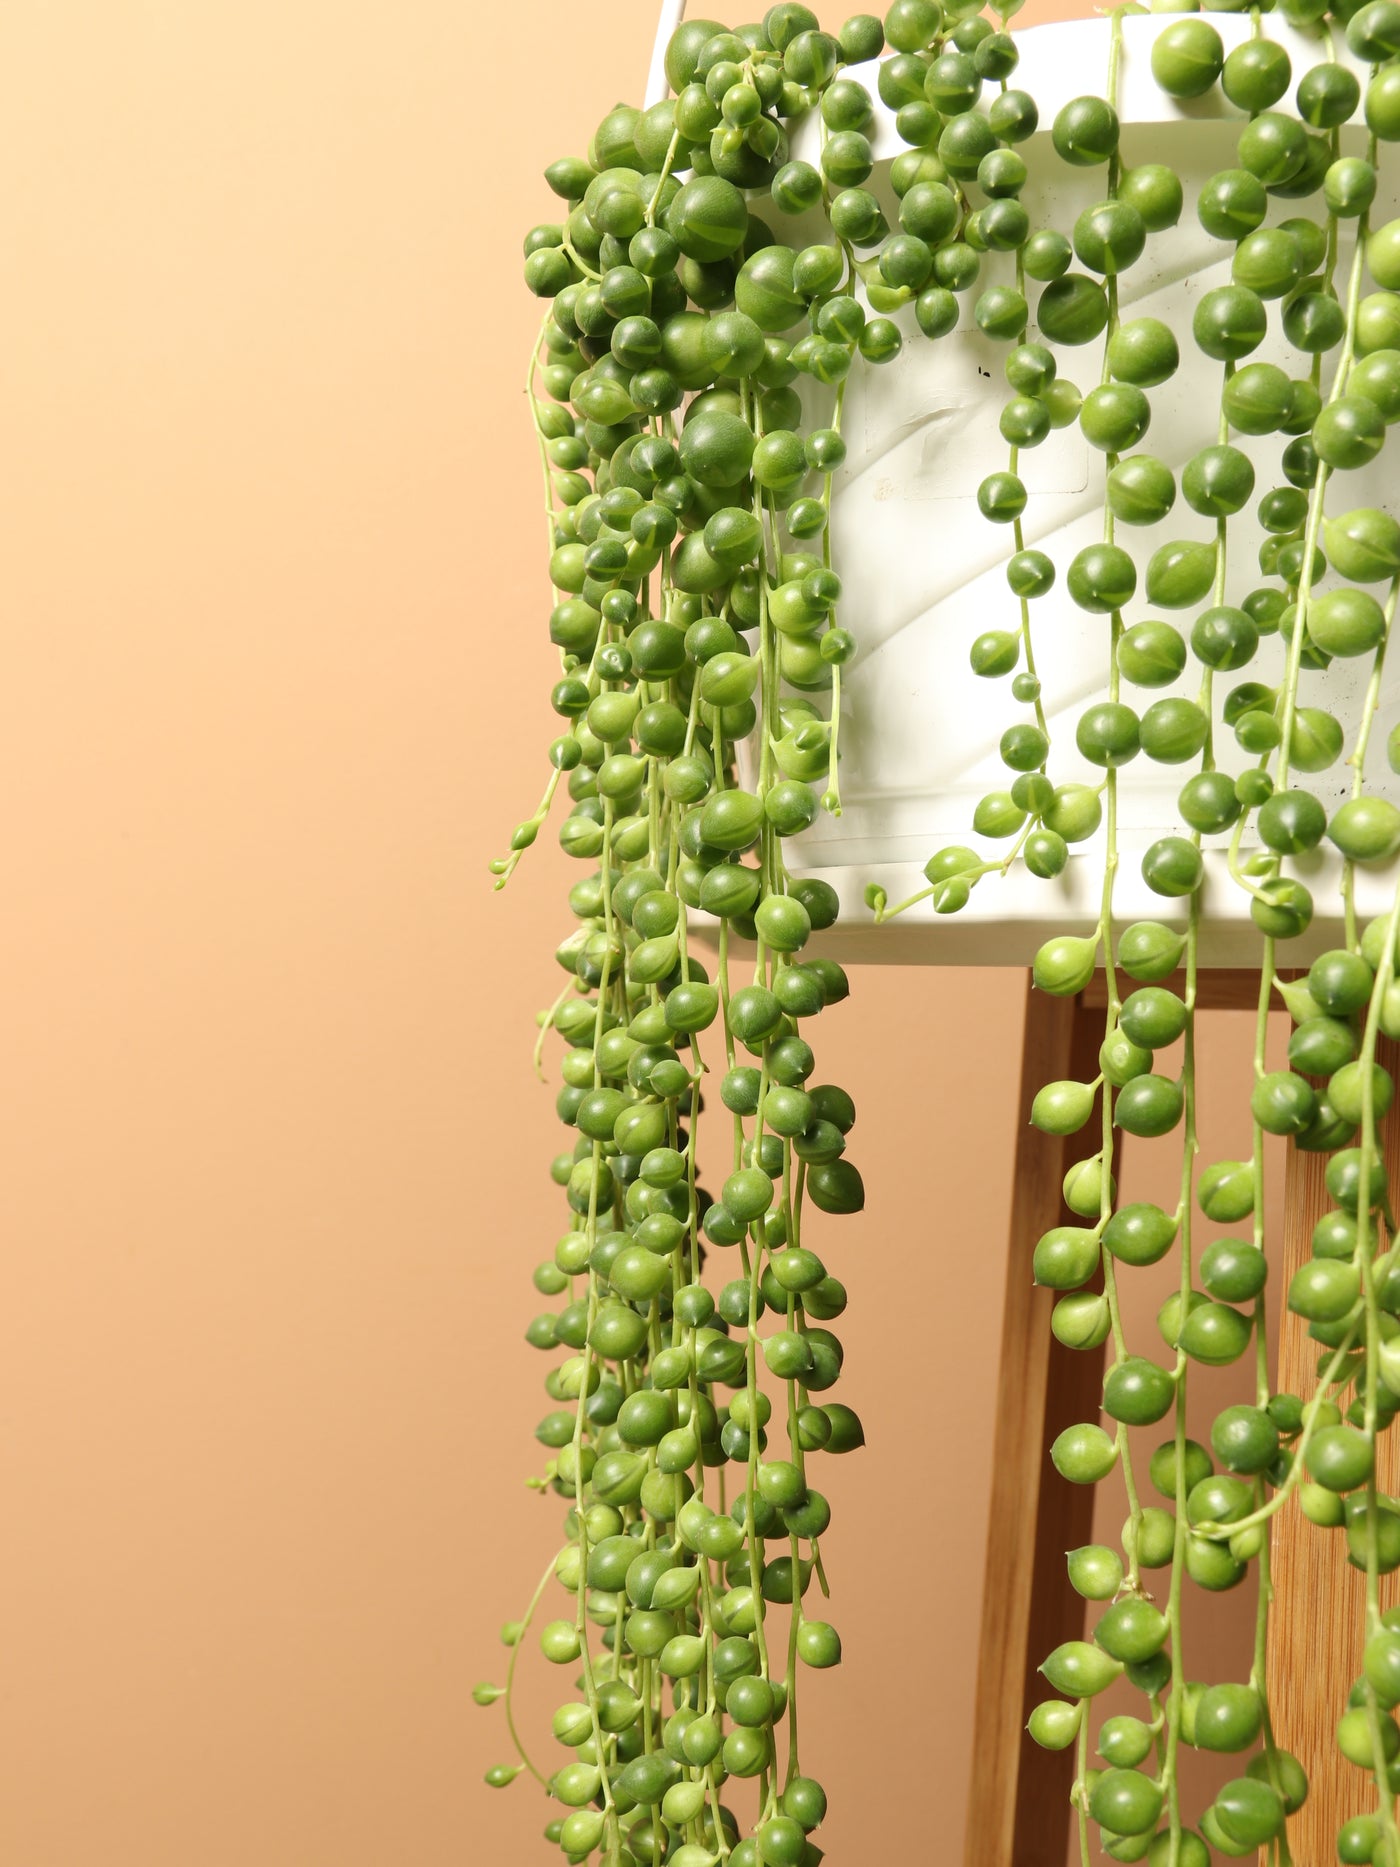 How to Grow and Care for String of Pearls (Complete Guide)